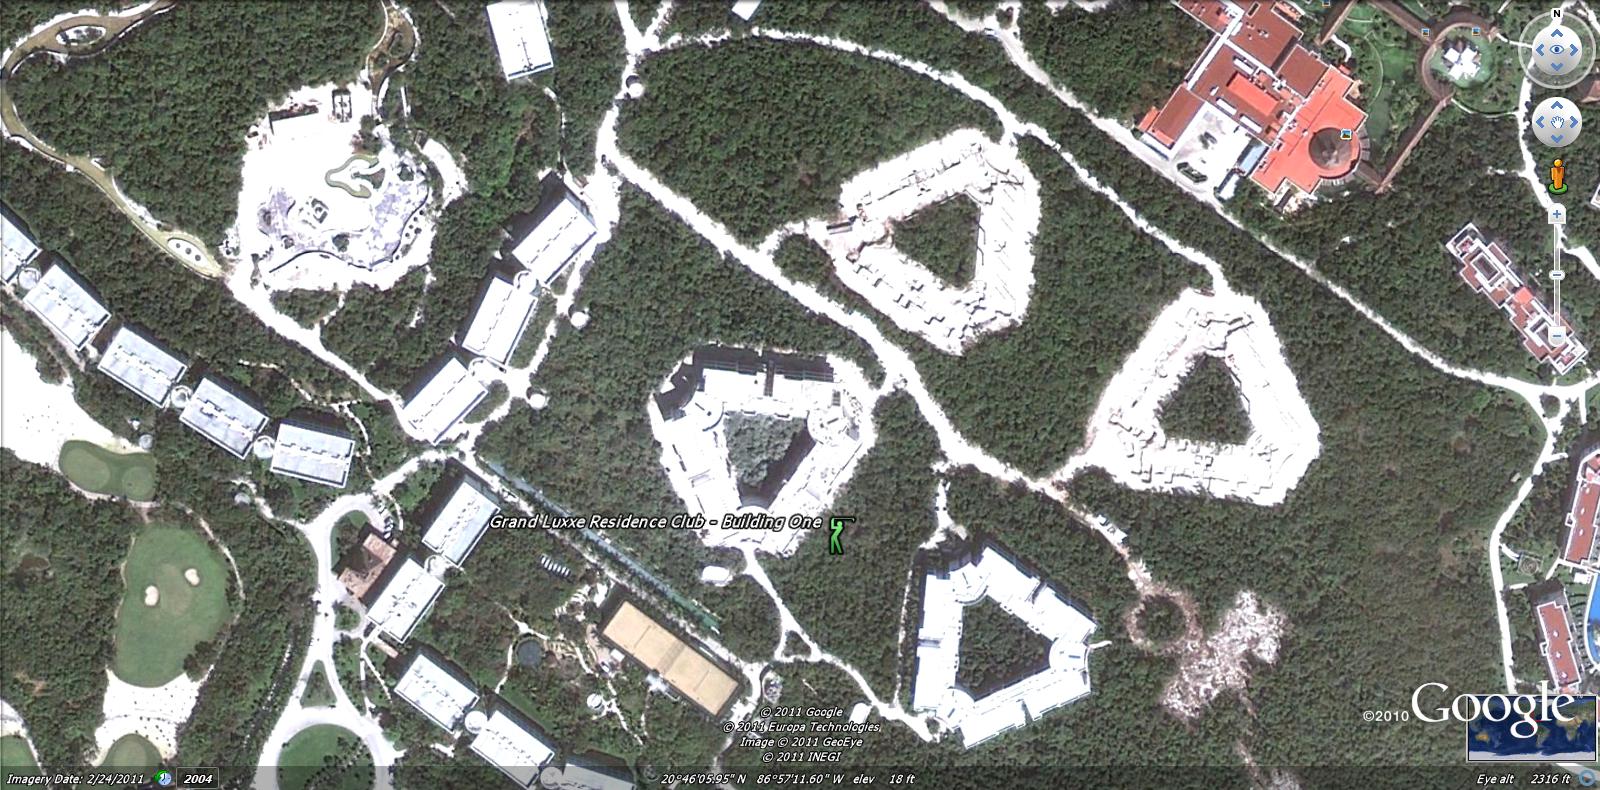 Grand Luxxe Residence Club Buildings Google Earth Feb 24 2011